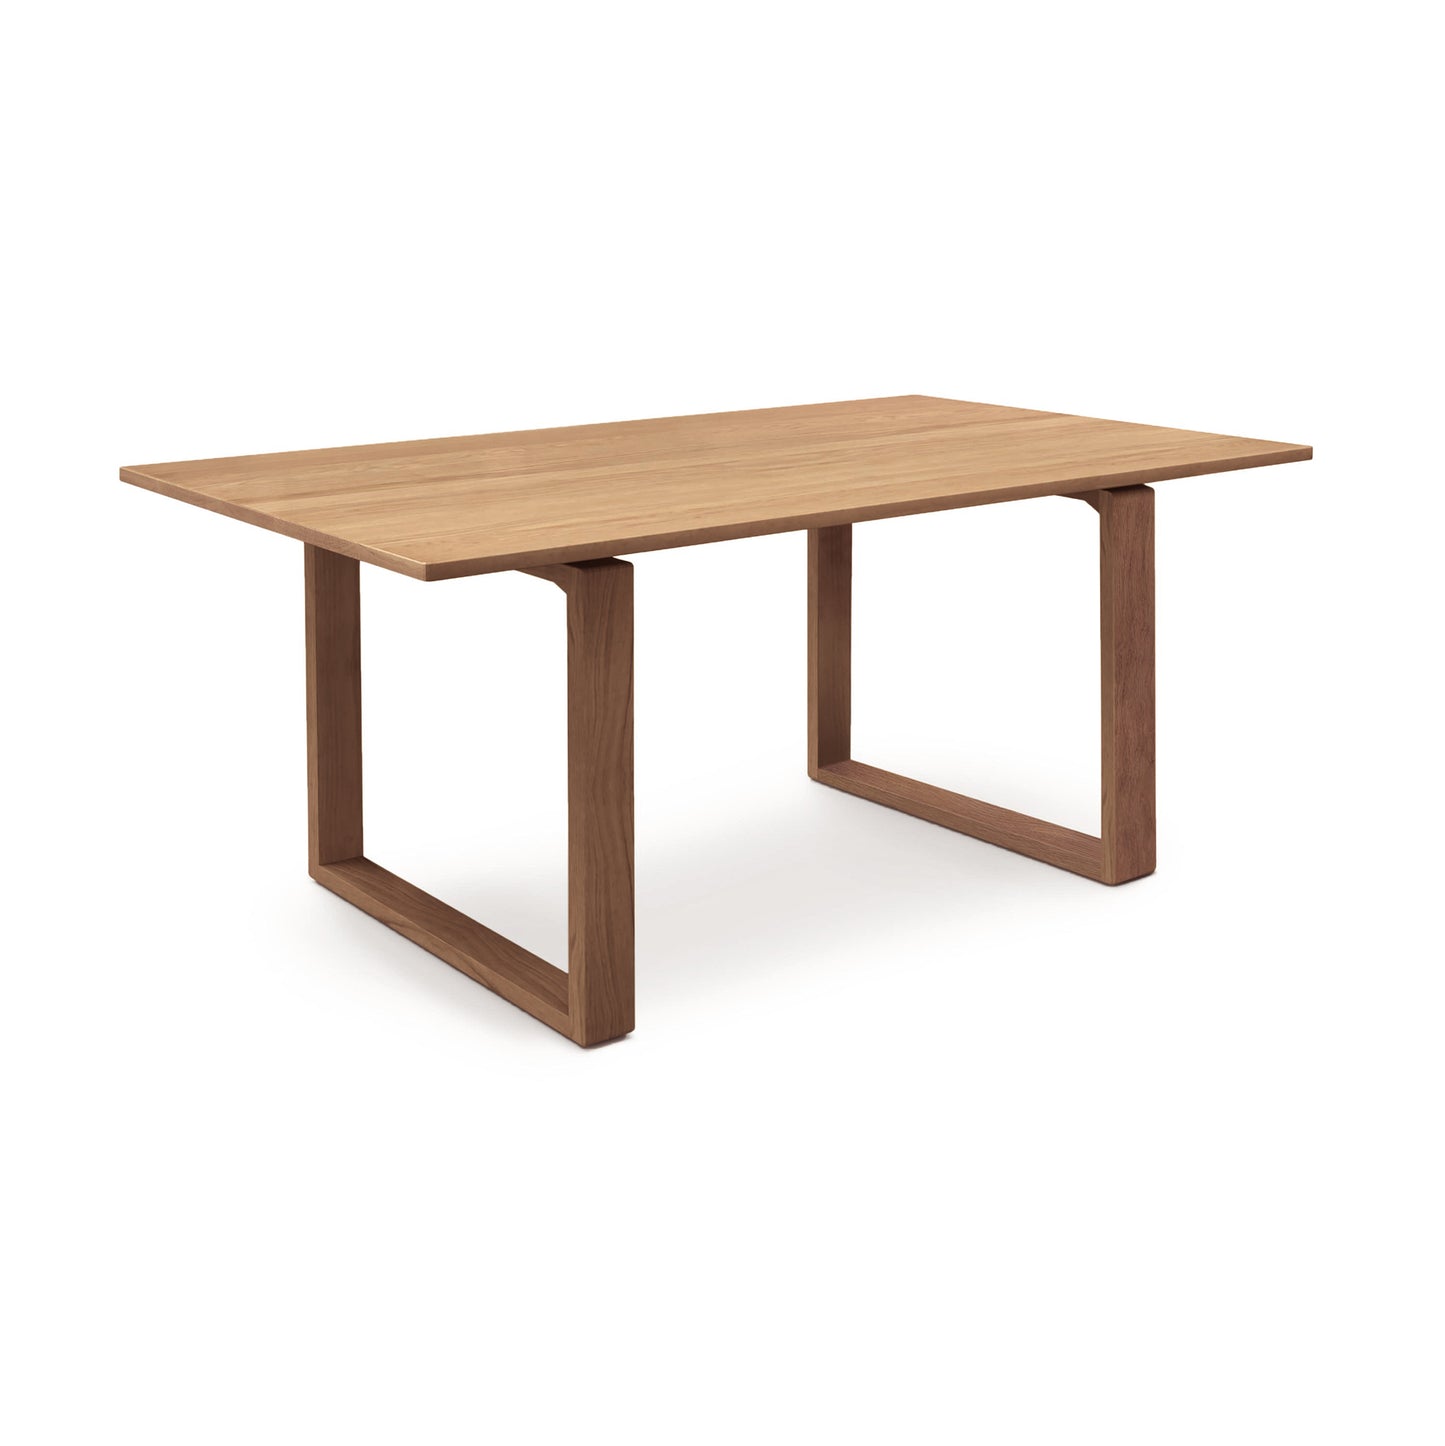 A Copeland Furniture Iso Solid Top Dining Table with a simplistic and modern design, featuring a flat rectangular top and two wide, u-shaped legs, crafted from sustainably sourced North American hardwoods.